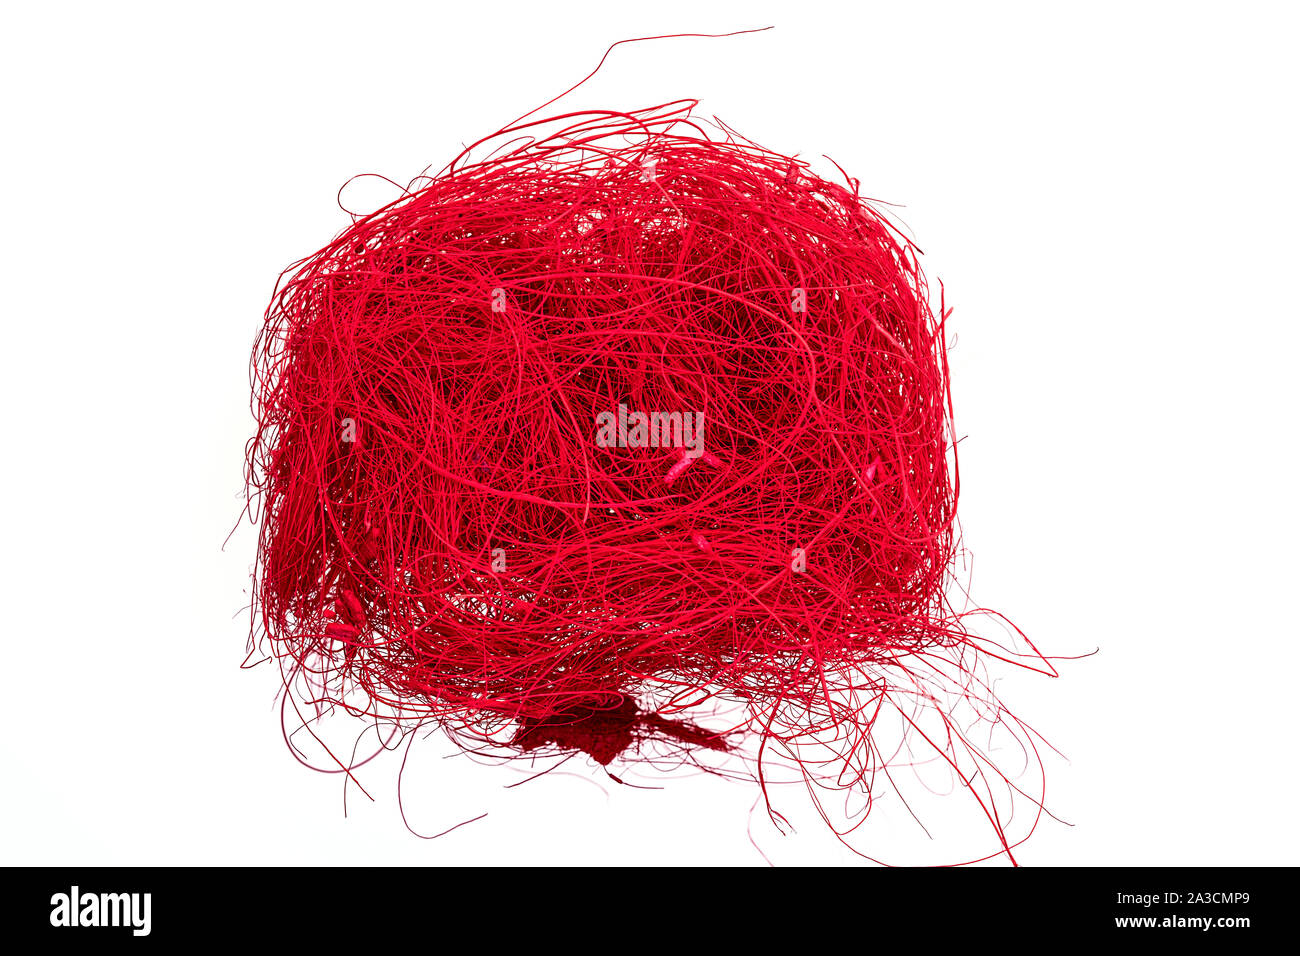 a ball of fine thin red colored intertwined flax cords Stock Photo